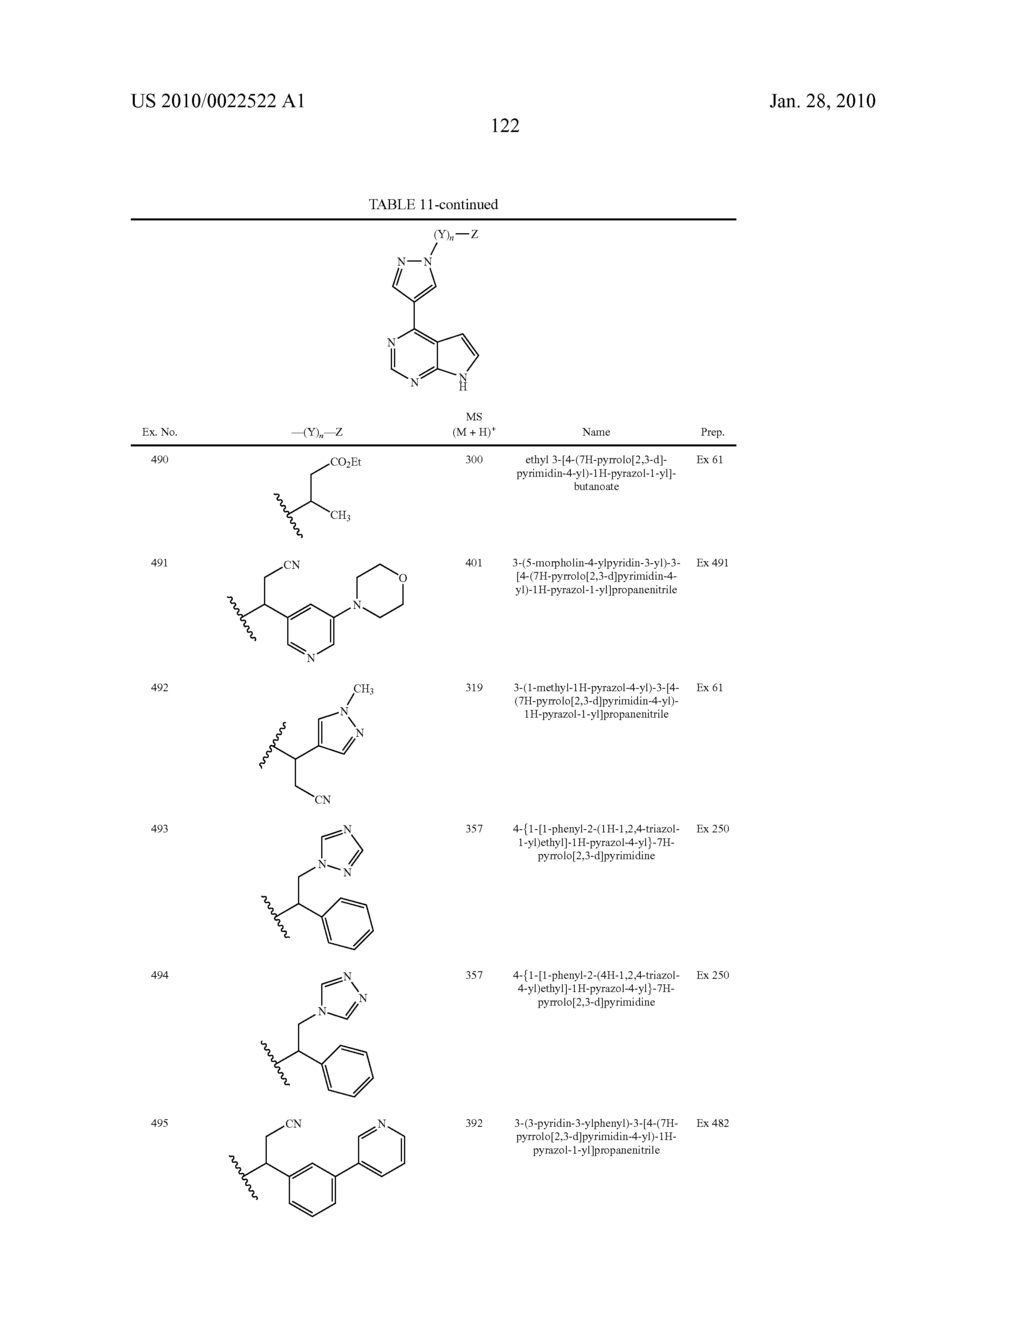 HETEROARYL SUBSTITUTED PYRROLO[2,3-b]PYRIDINES AND PYRROLO[2,3-b]PYRIMIDINES AS JANUS KINASE INHIBITORS - diagram, schematic, and image 123